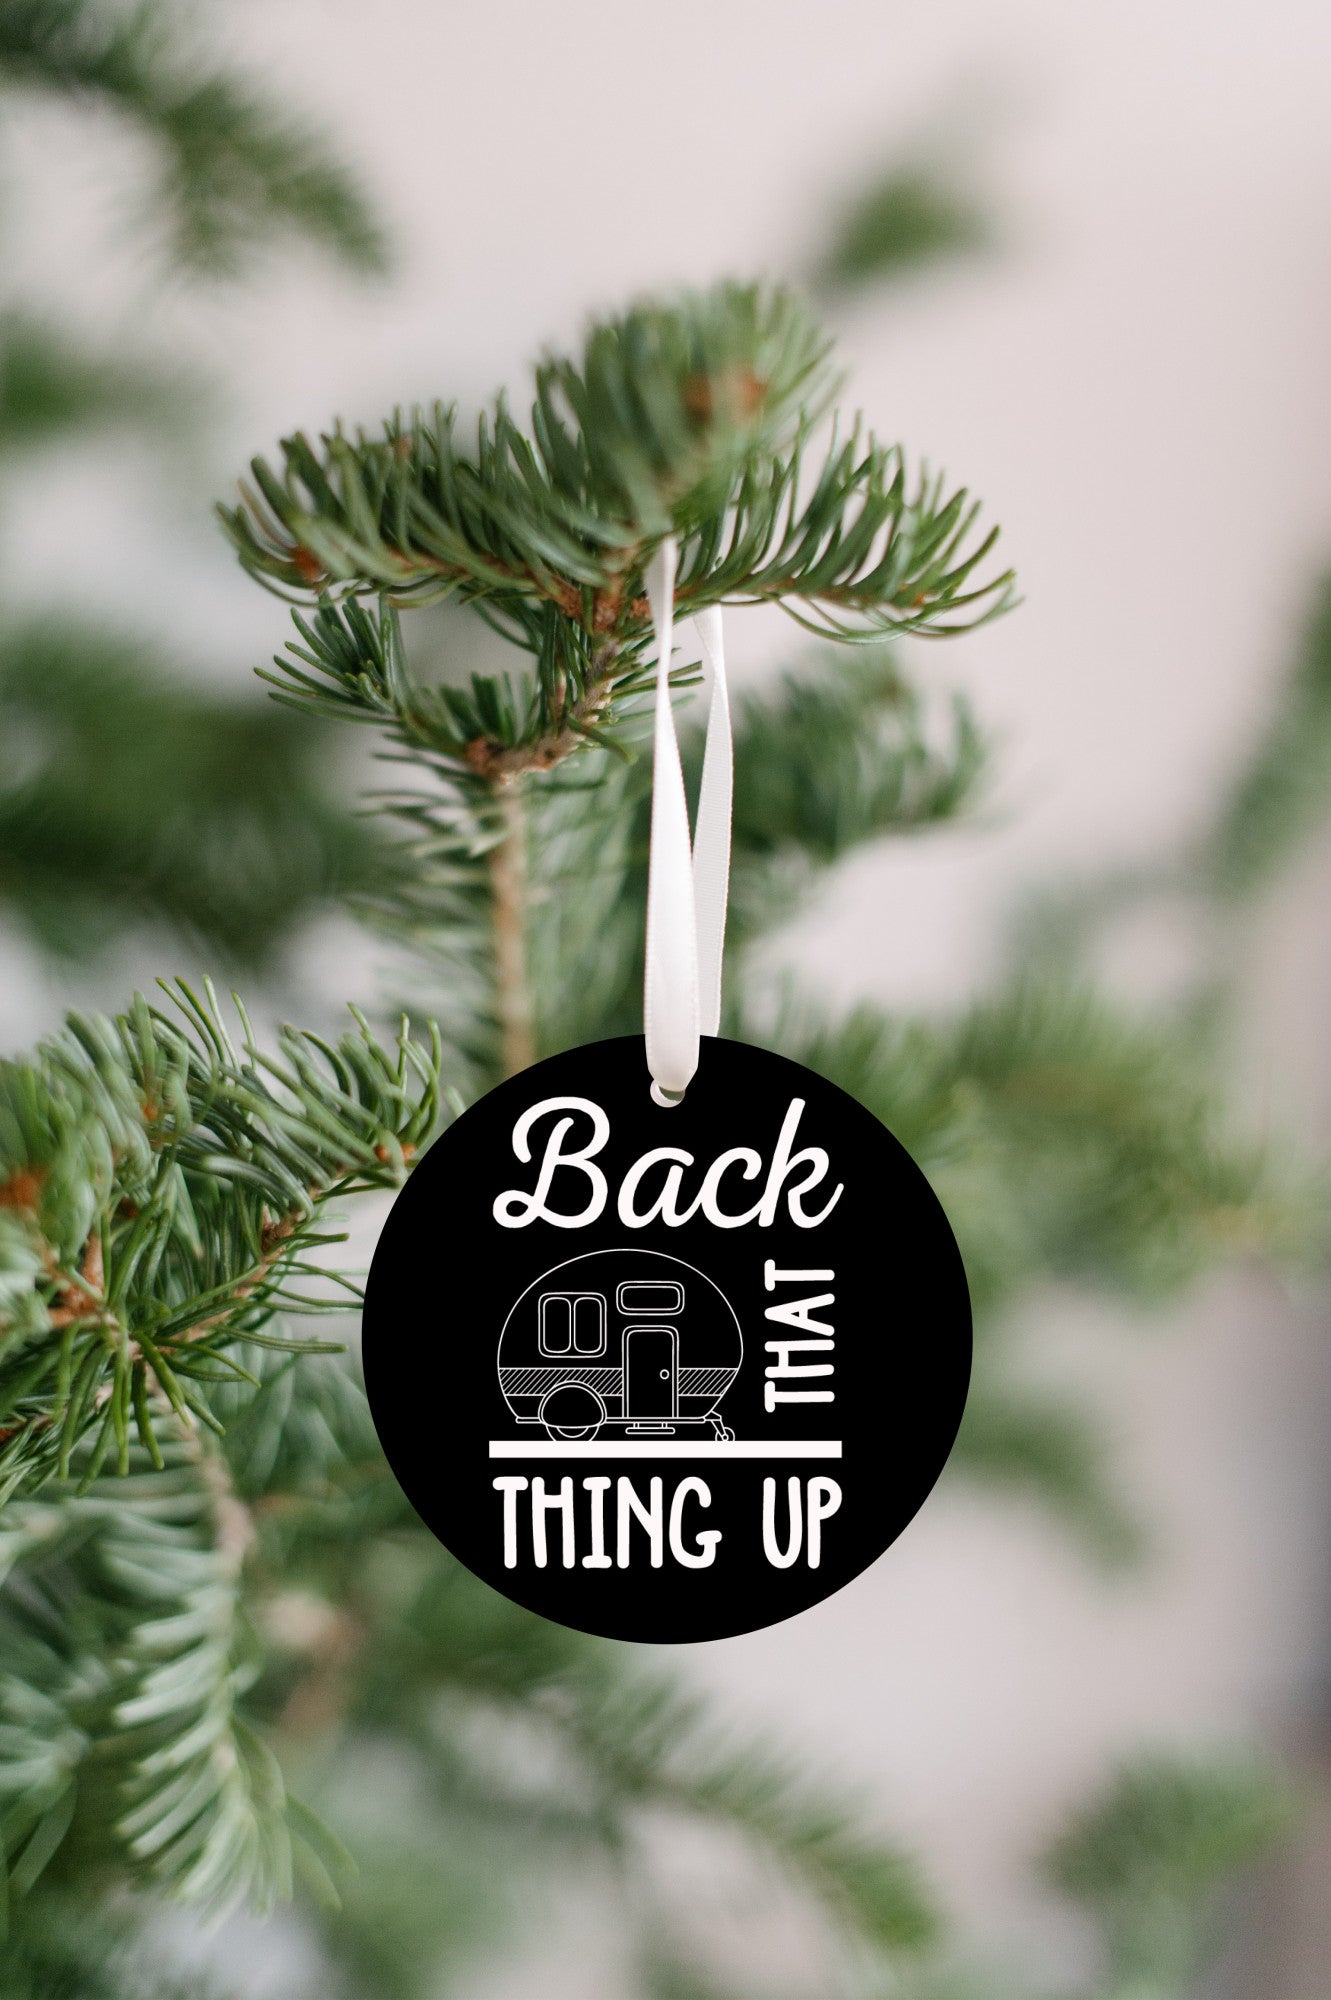 Camp Trailer; Back that thing up - Ornament